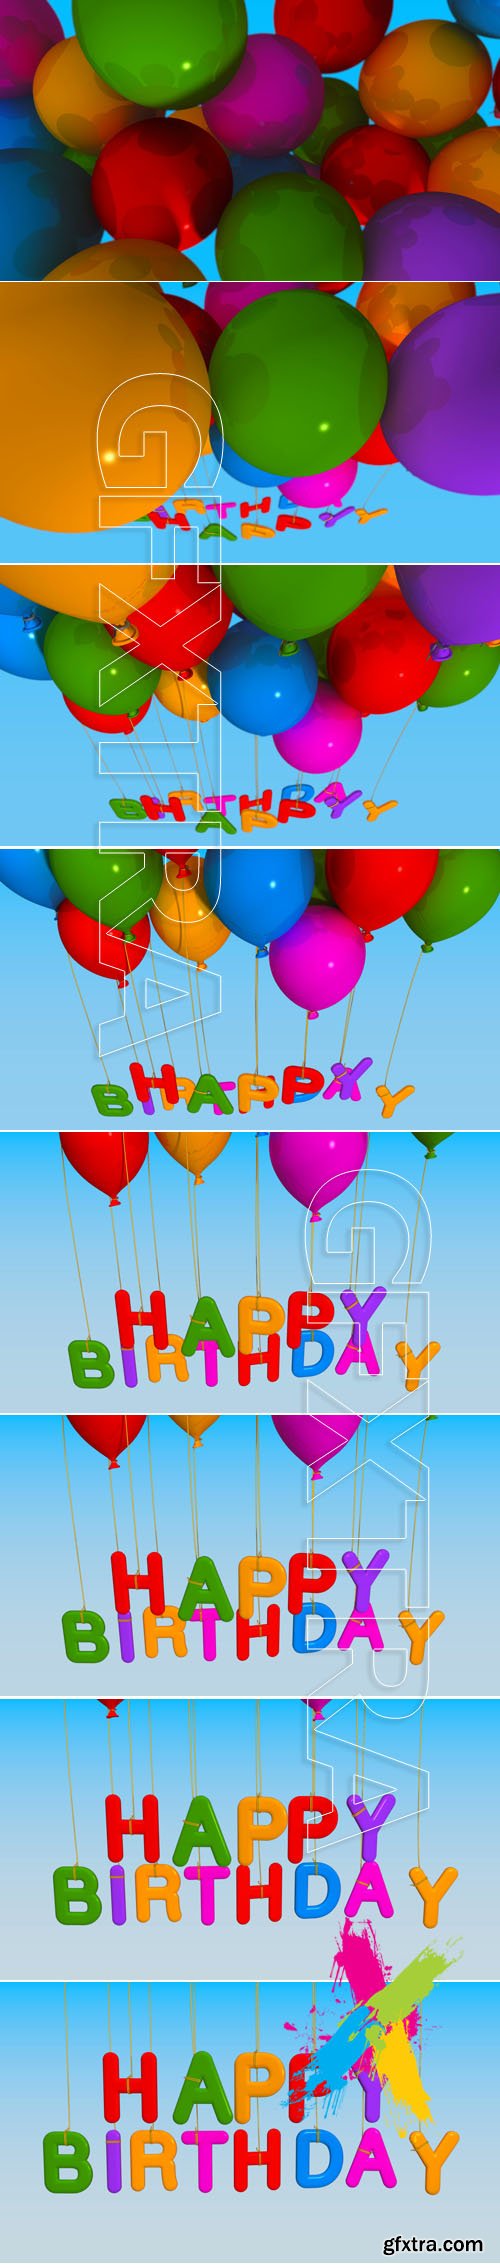 Group of balloons with the words Happy Birthday hanging from the strings in multicolored shades Footage